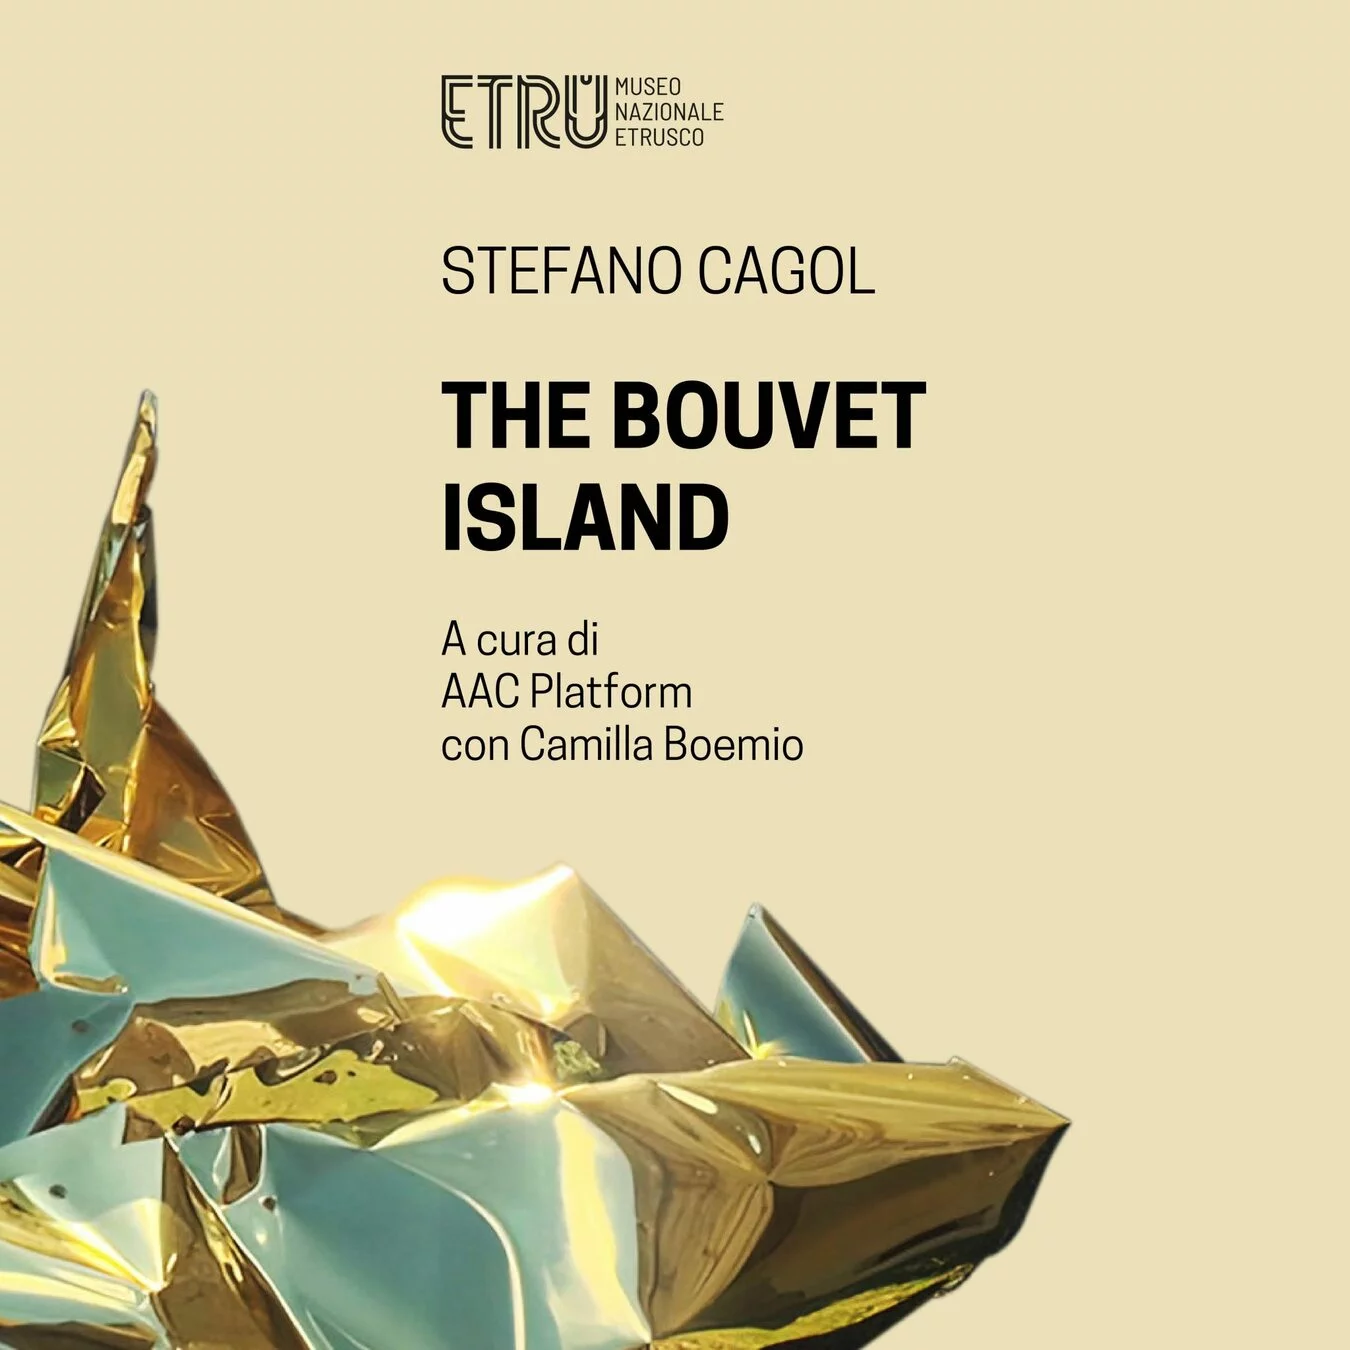 Stefano Cagol. The Bouvet Island